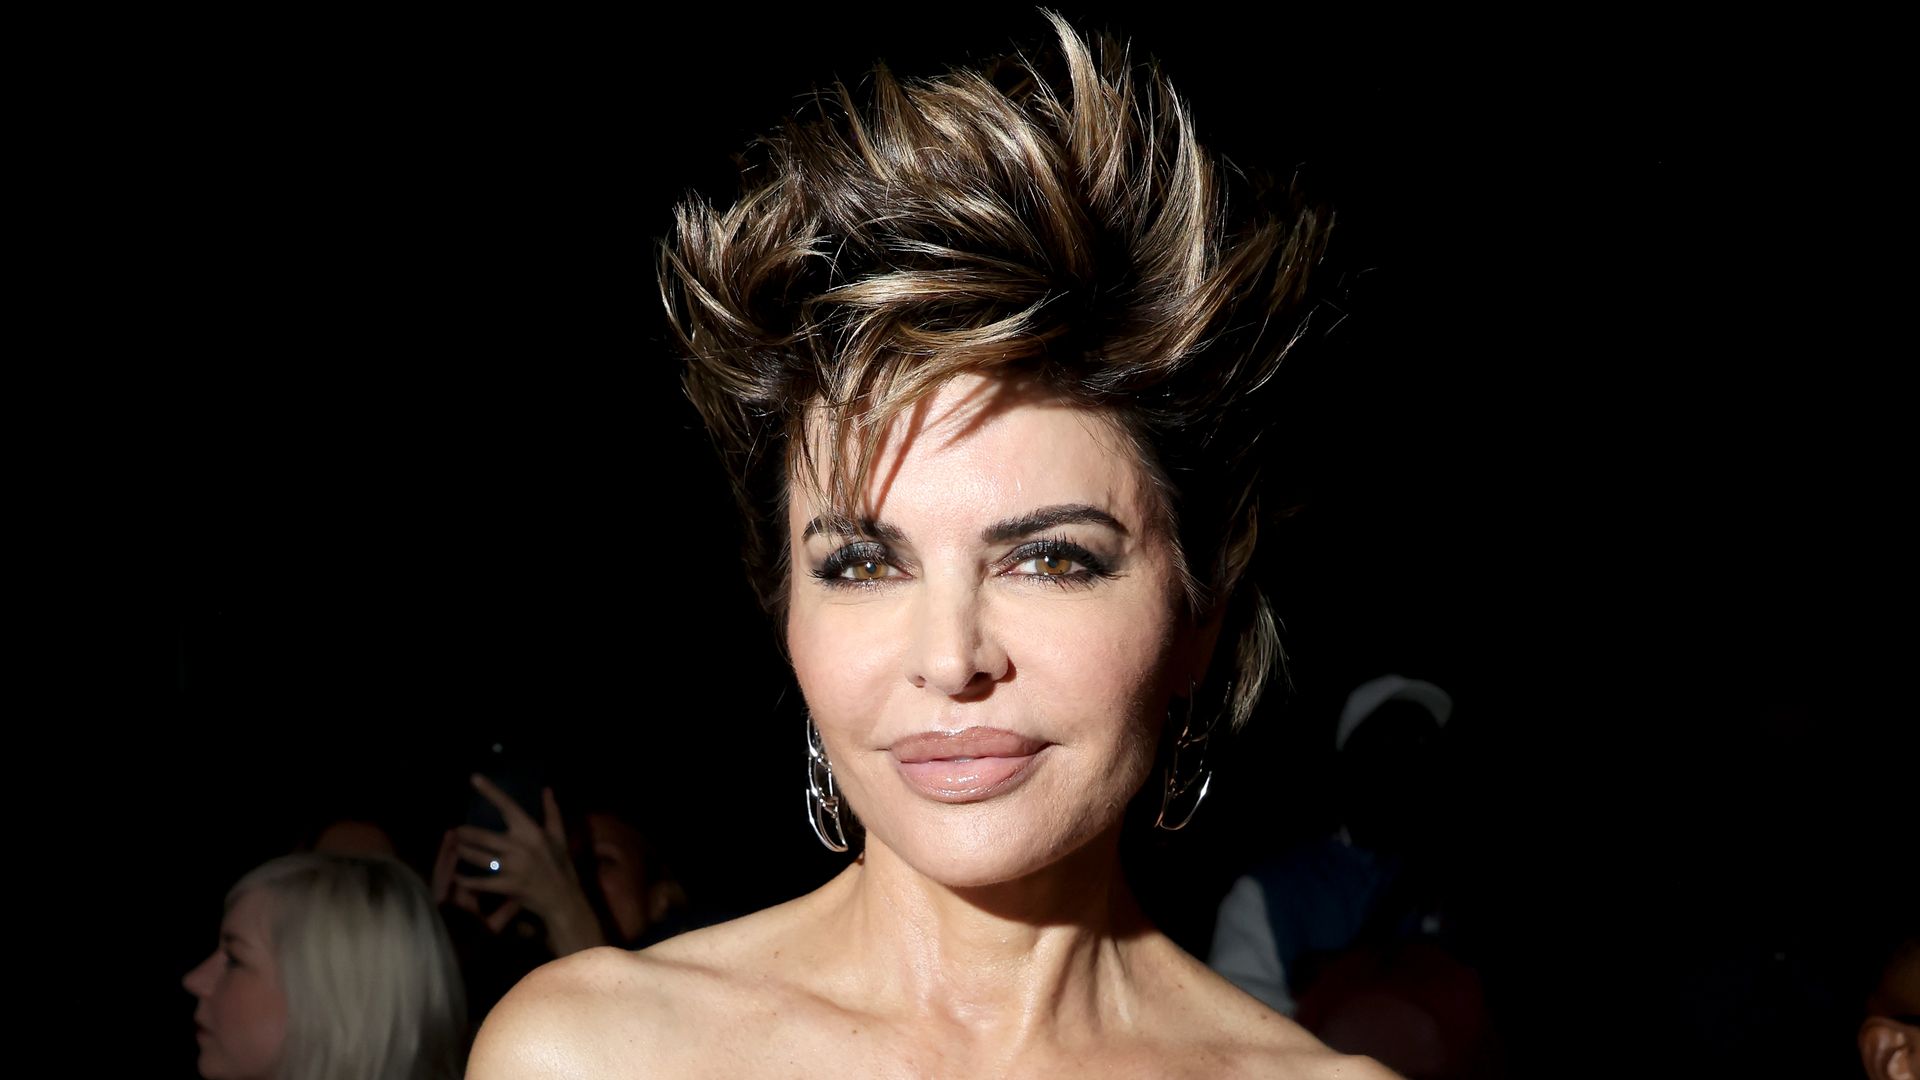 Lisa Rinna attends the Mugler Fall Winter 2022/23 Haute Couture show at Grande Halle de La Villette, as part of Paris Fashion Week on January 26, 2023 in Paris, France